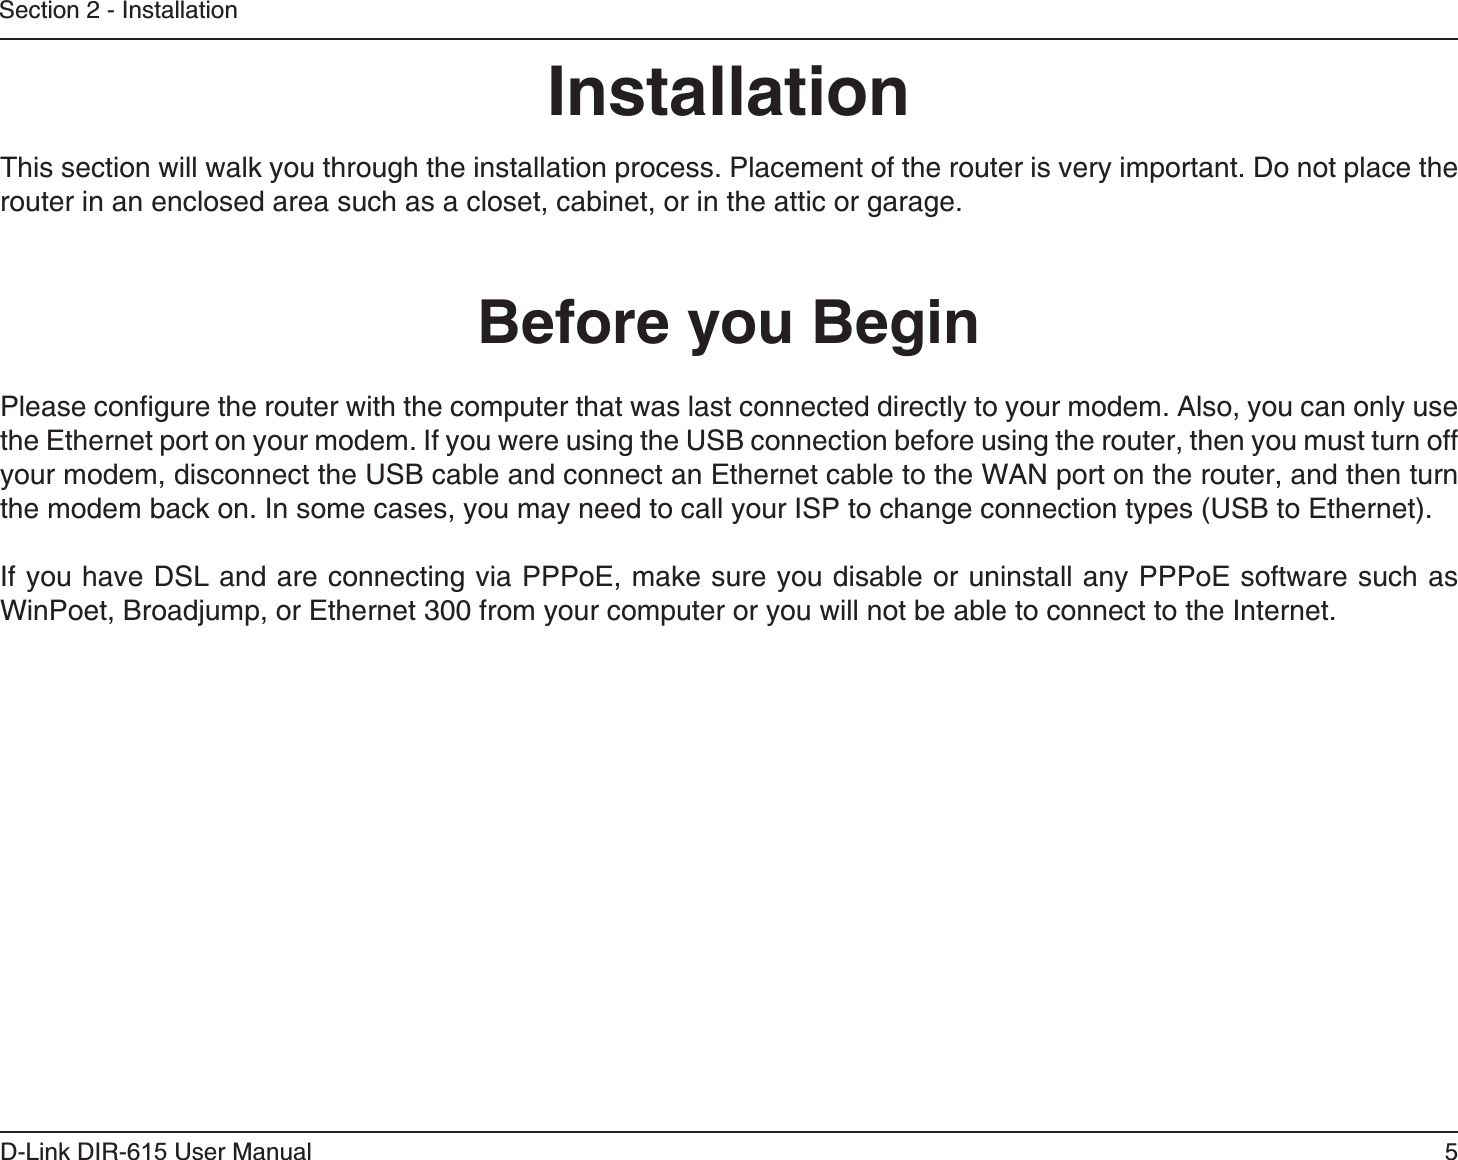 5D-Link DIR-6 User ManualSection 2 - InstallationInstallationThis section will walk you through the installation process. Placement of the router is very important. Do not place the router in an enclosed area such as a closet, cabinet, or in the attic or garage. Please configure the router with the computer that was last connected directly to your modem. Also, you can only use the Ethernet port on your modem. If you were using the USB connection before using the router, then you must turn off your modem, disconnect the USB cable and connect an Ethernet cable to the WAN port on the router, and then turn the modem back on. In some cases, you may need to call your ISP to change connection types (USB to Ethernet). If you have DSL and are connecting via PPPoE, make sure you disable or uninstall any PPPoE software such as WinPoet, Broadjump, or Ethernet 300 from your computer or you will not be able to connect to the Internet.